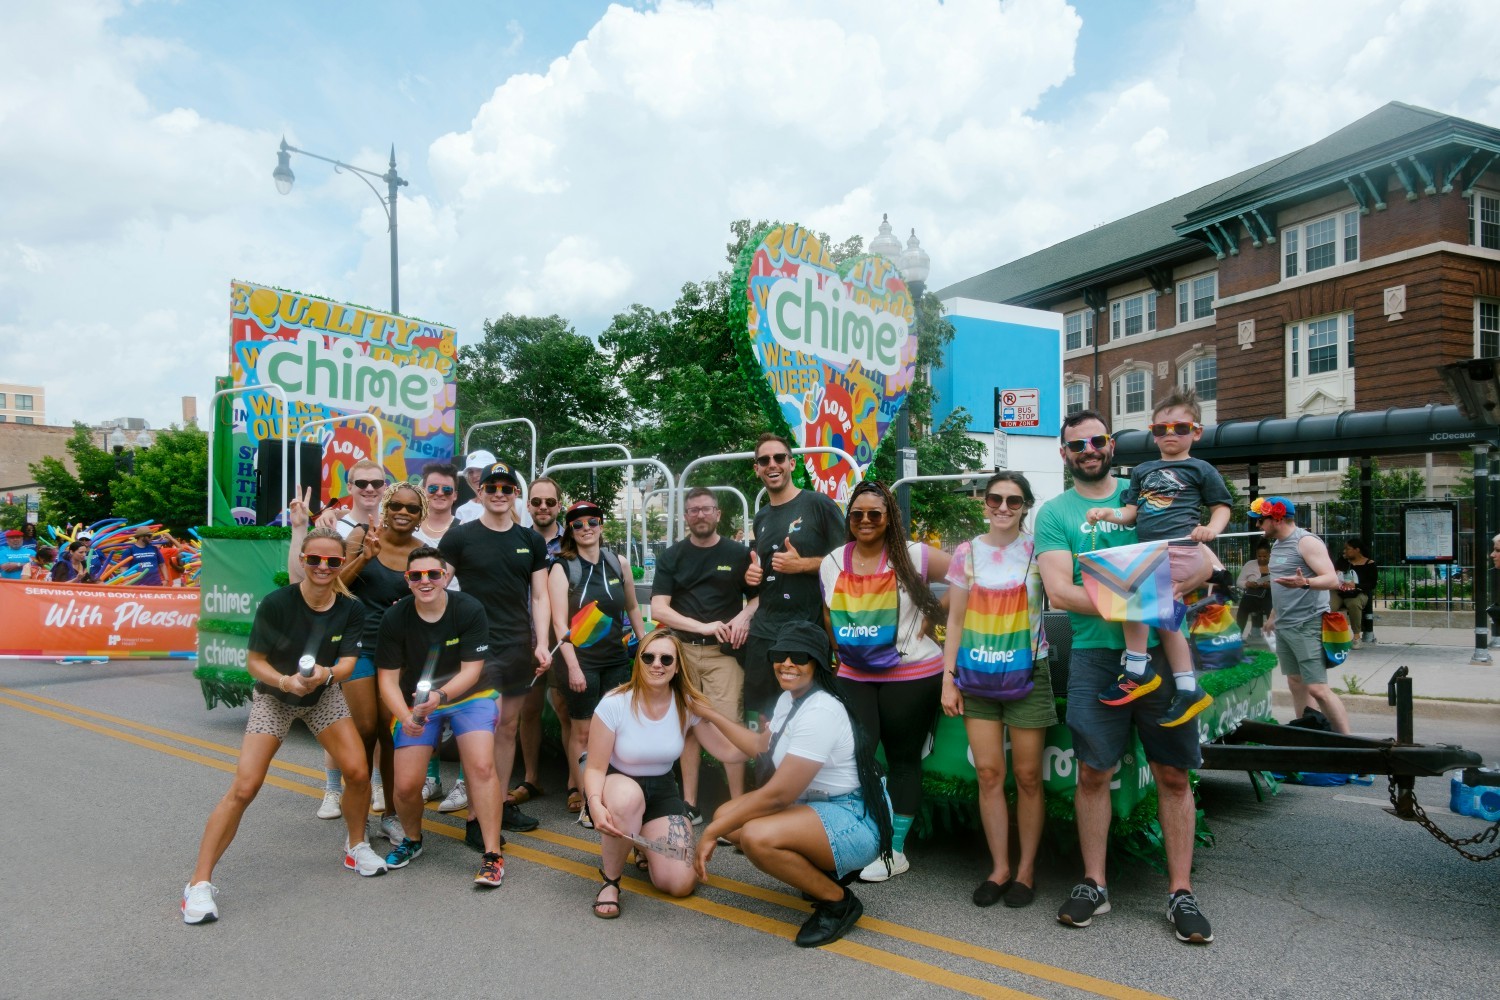 Chimers alongside the Chime float during the Chicago Pride Parade